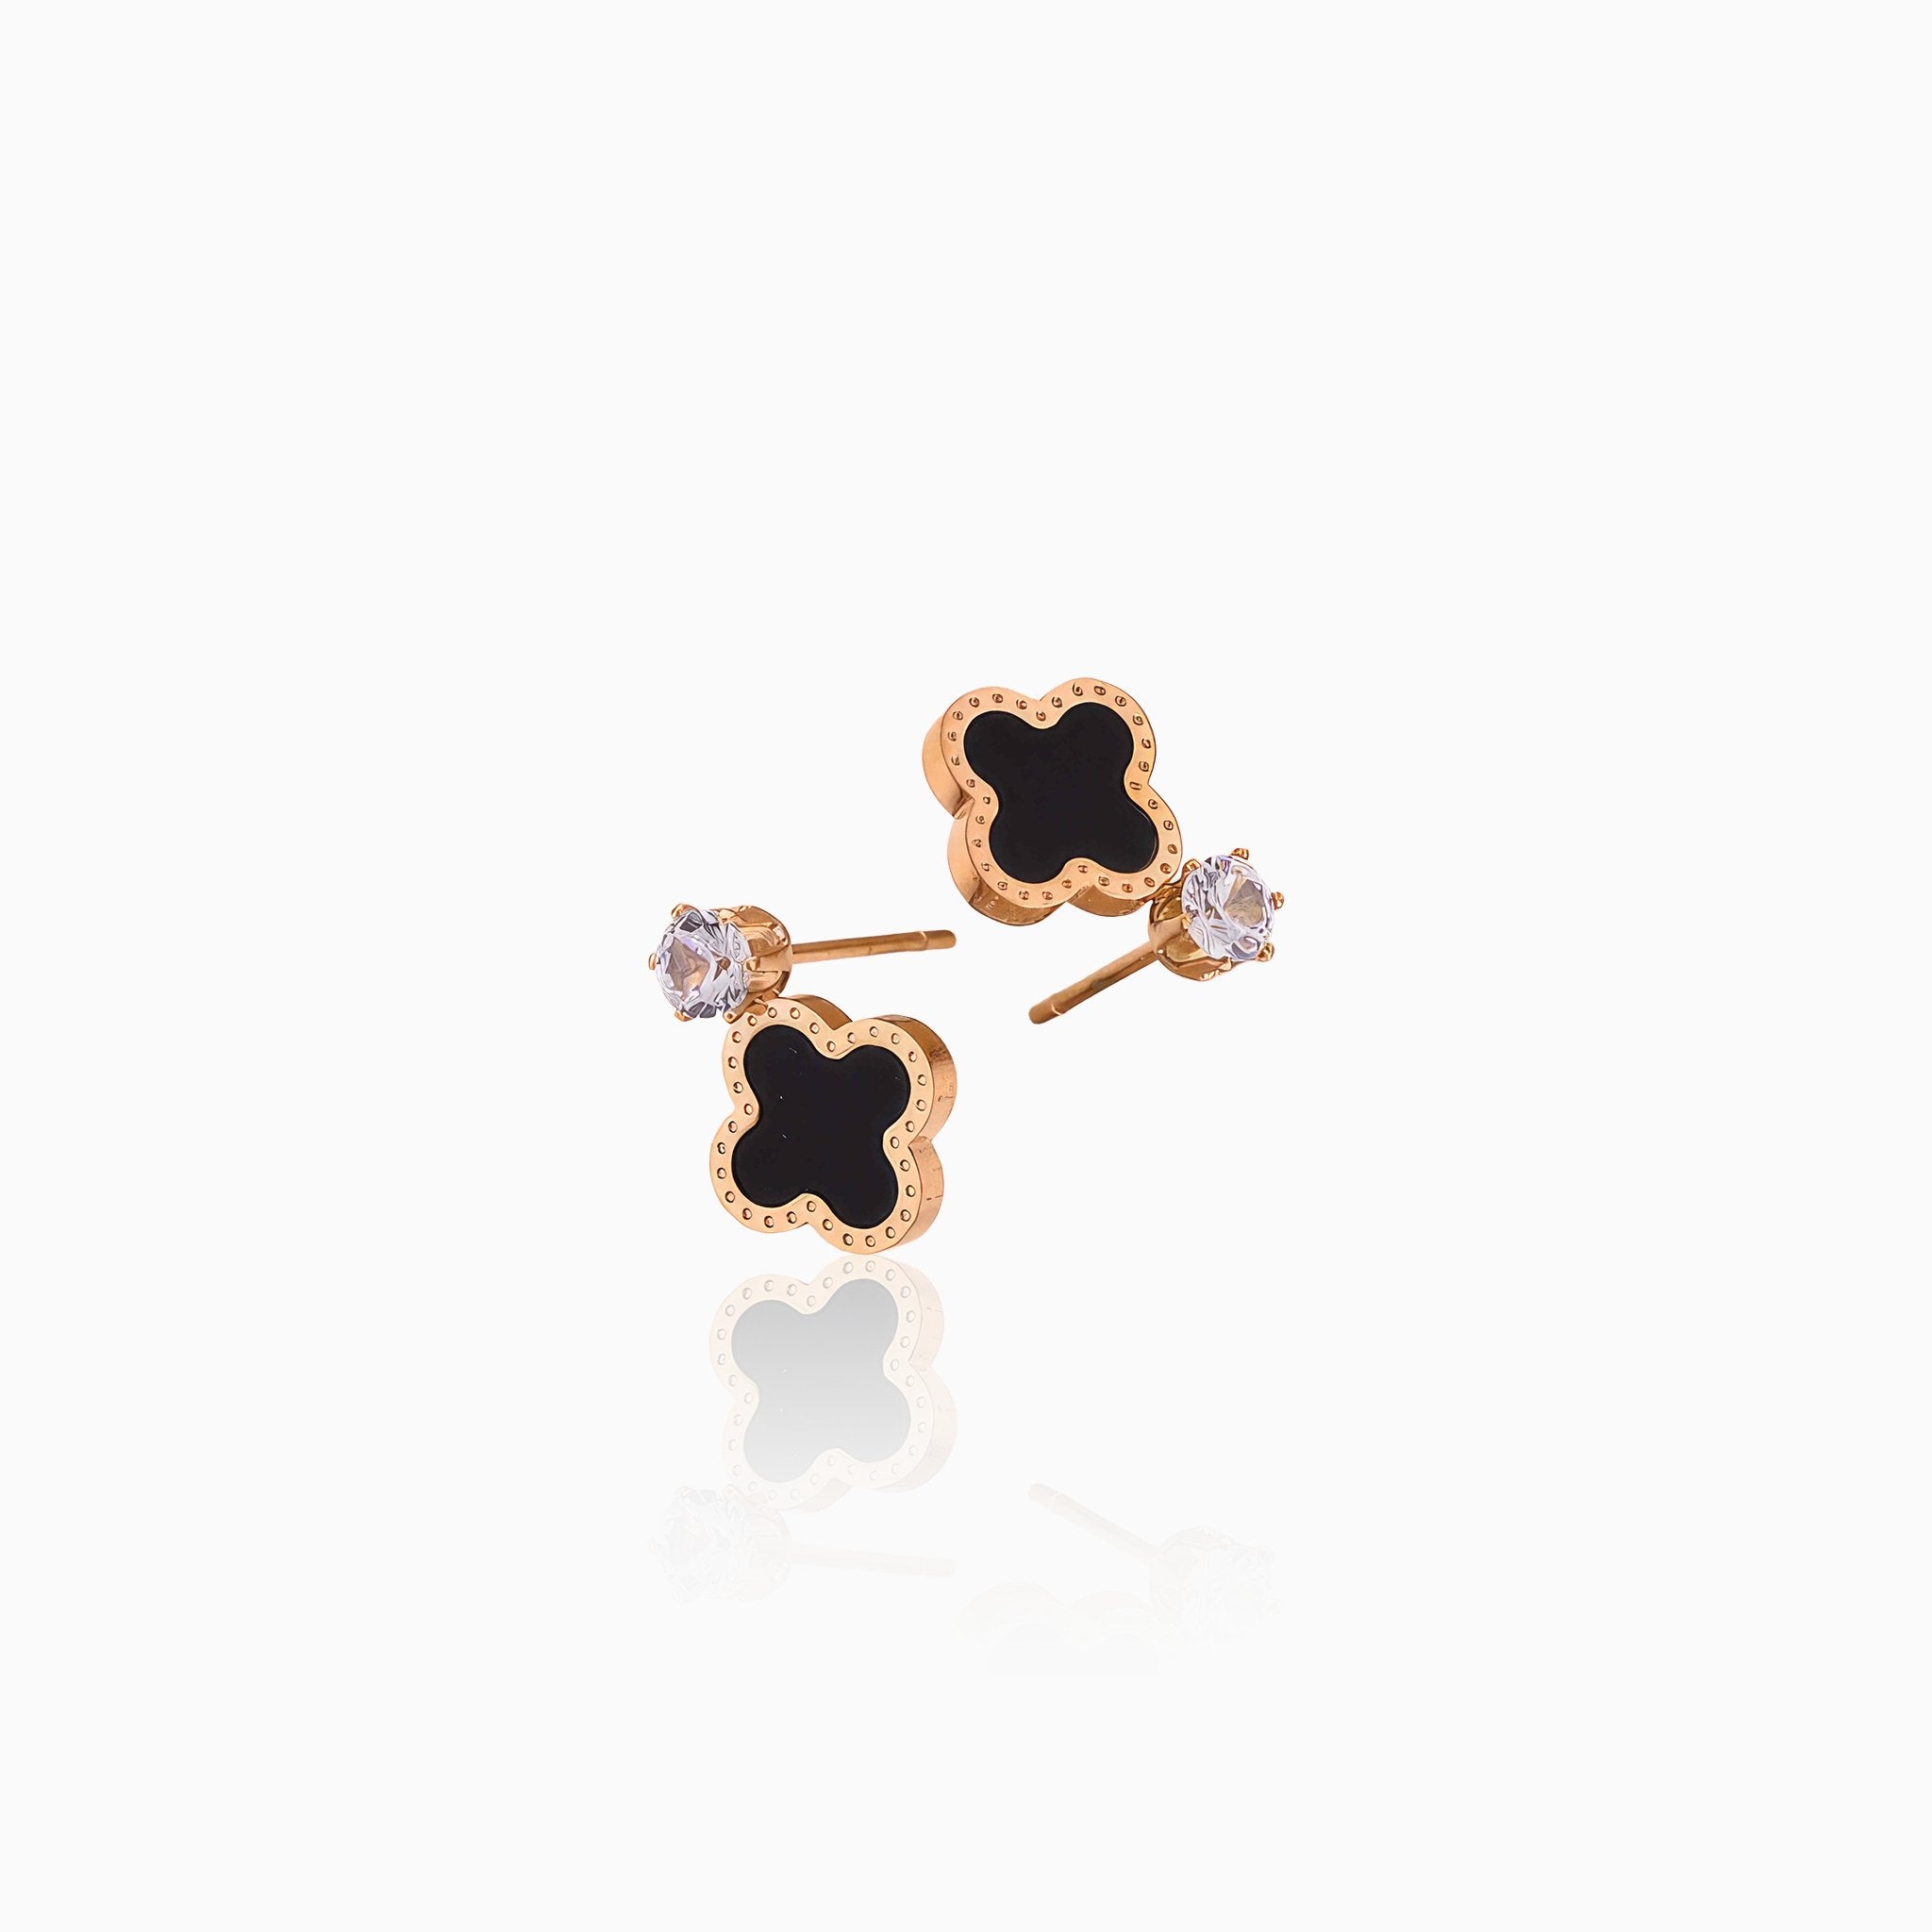 Four-Leaf Clover Earrings - Nobbier - Earrings - 18K Gold And Titanium PVD Coated Jewelry